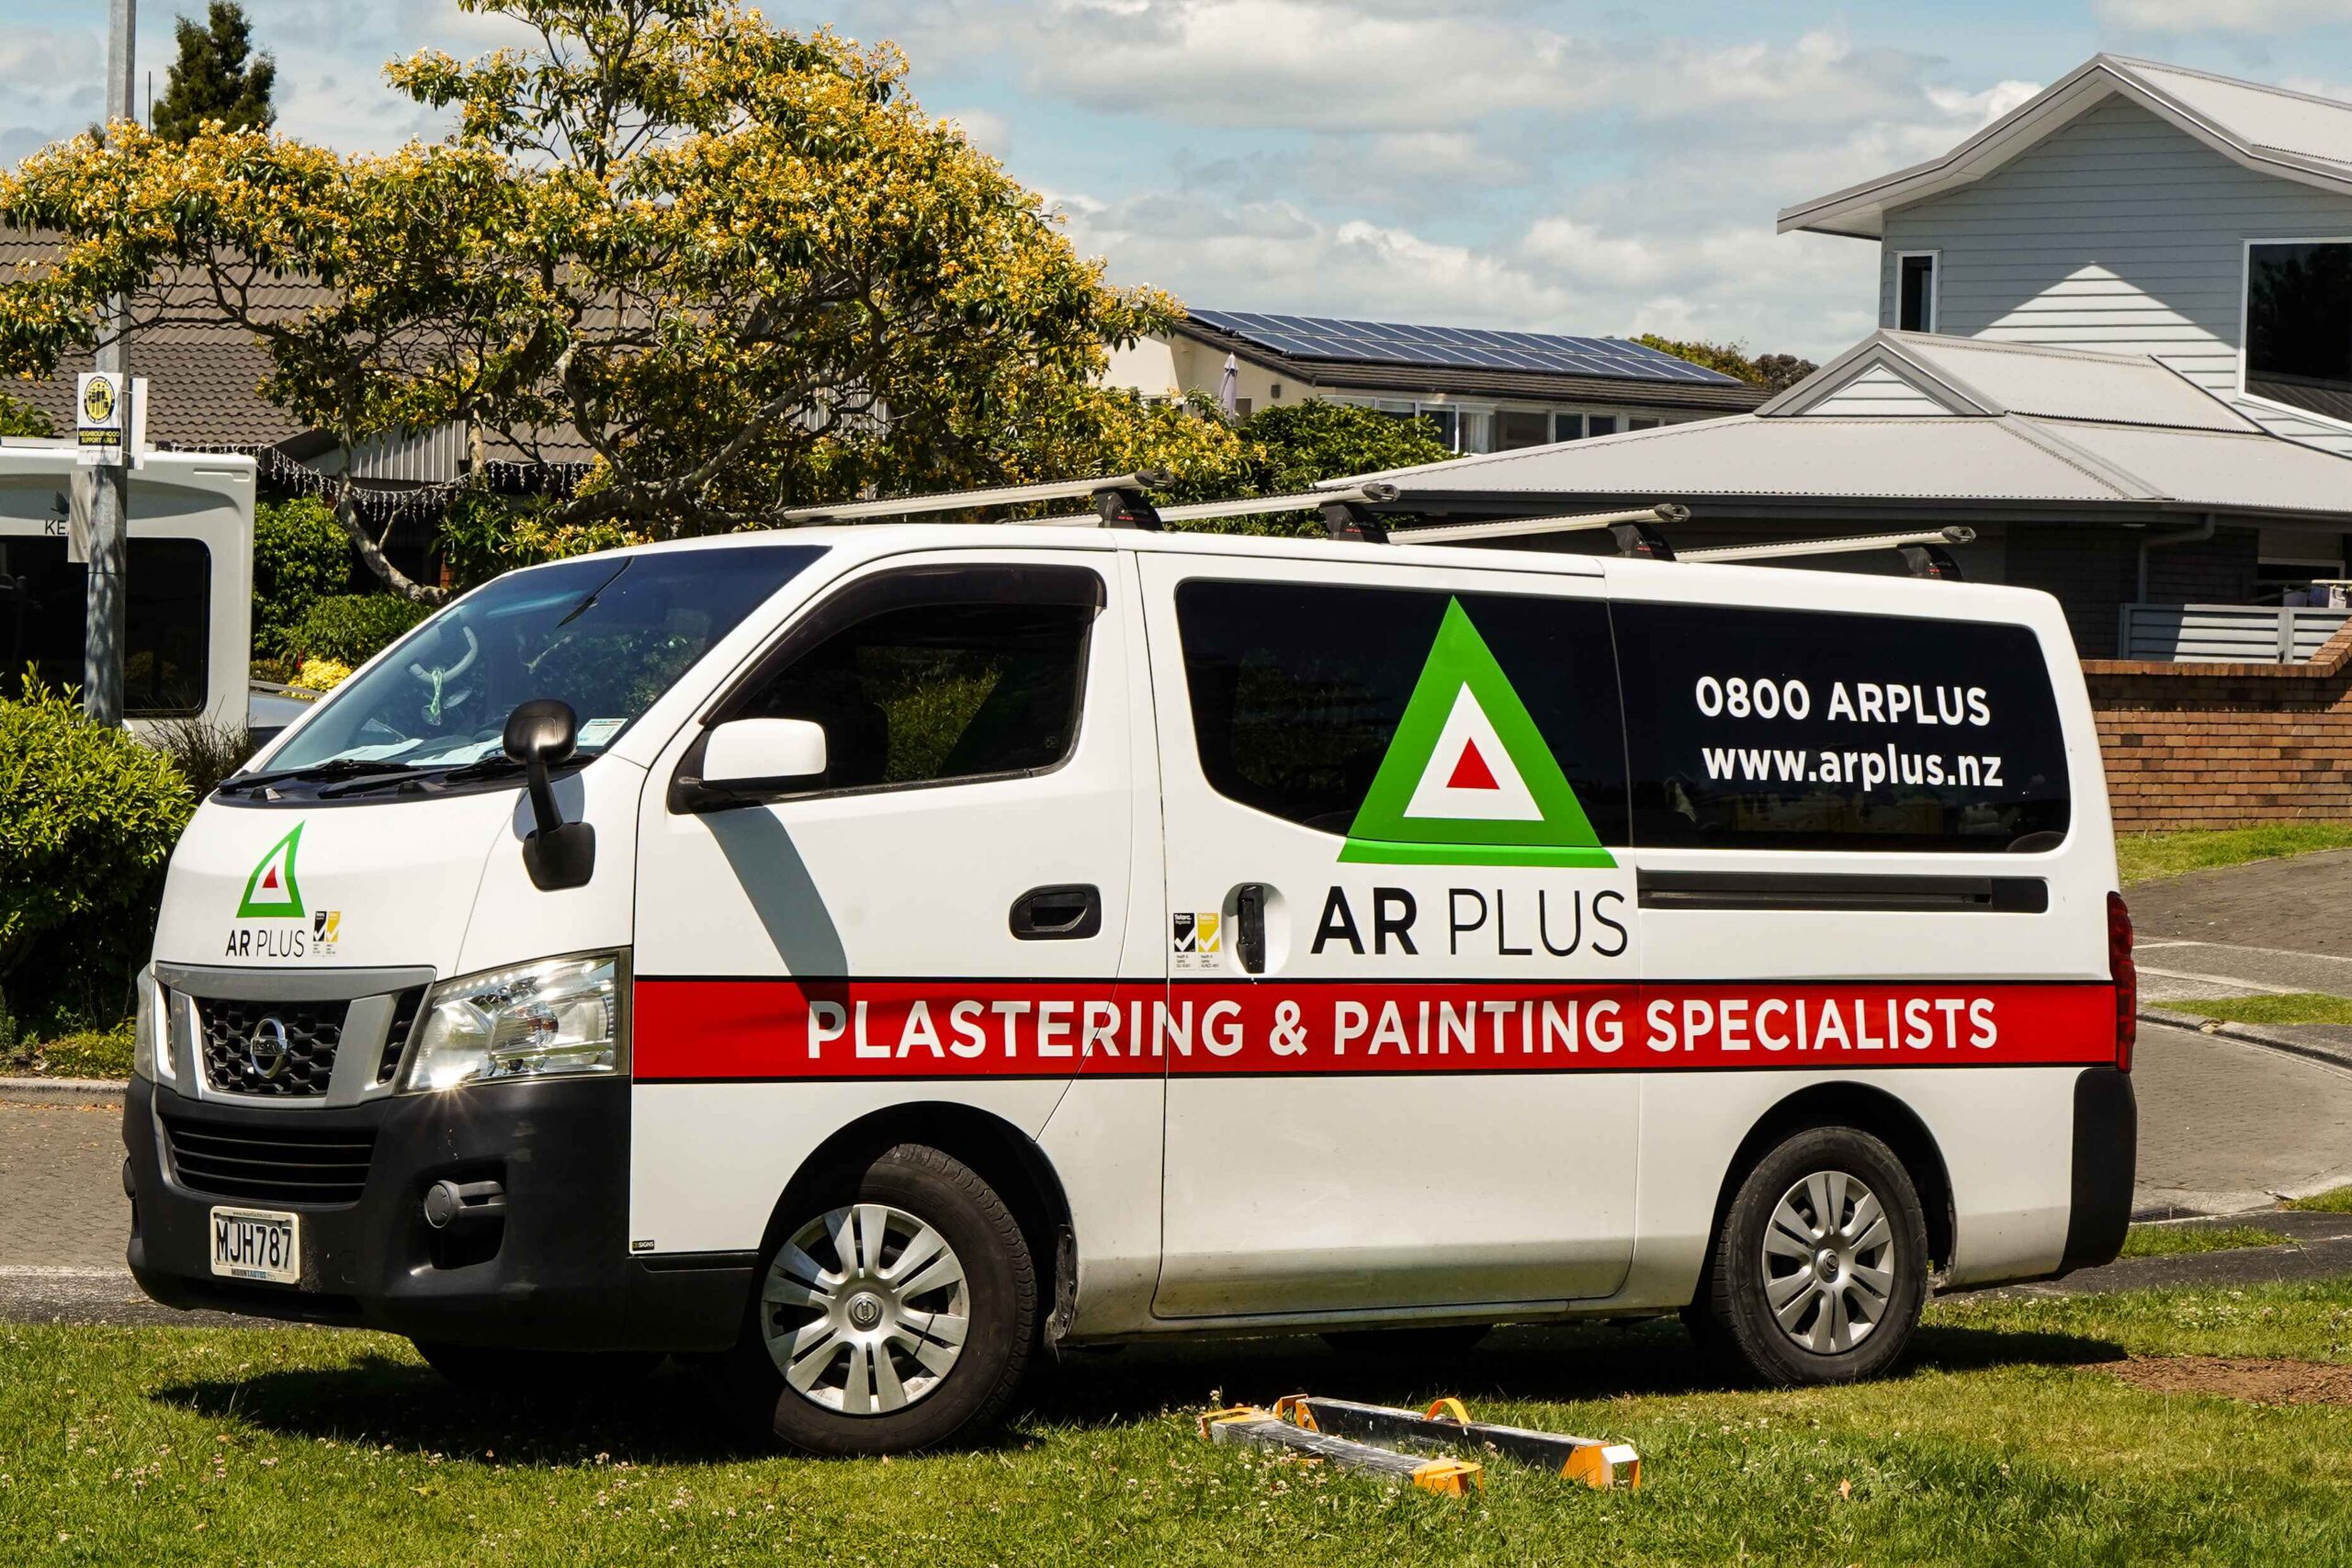 AR Plus painting and plastering specialists for the Bay of Plenty service van.